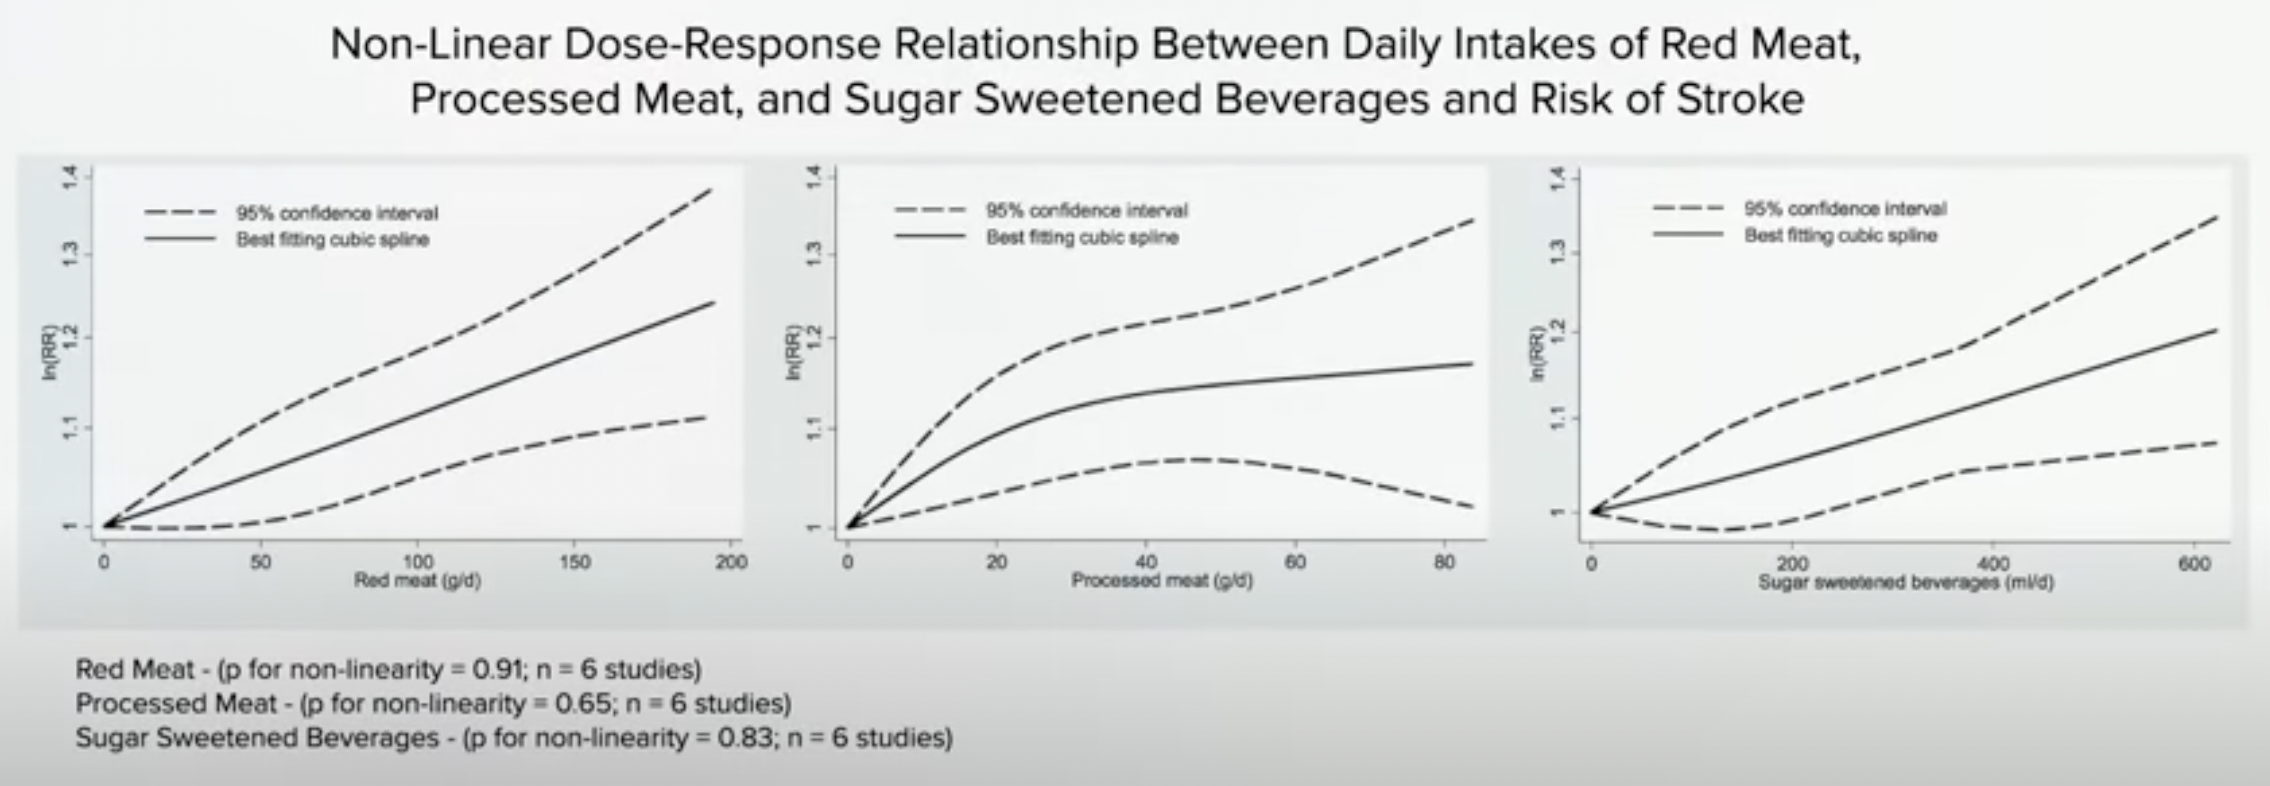 graphs showing relationship between daily intake of red meat, processed meat, and sugar sweetened beverages and stroke risk